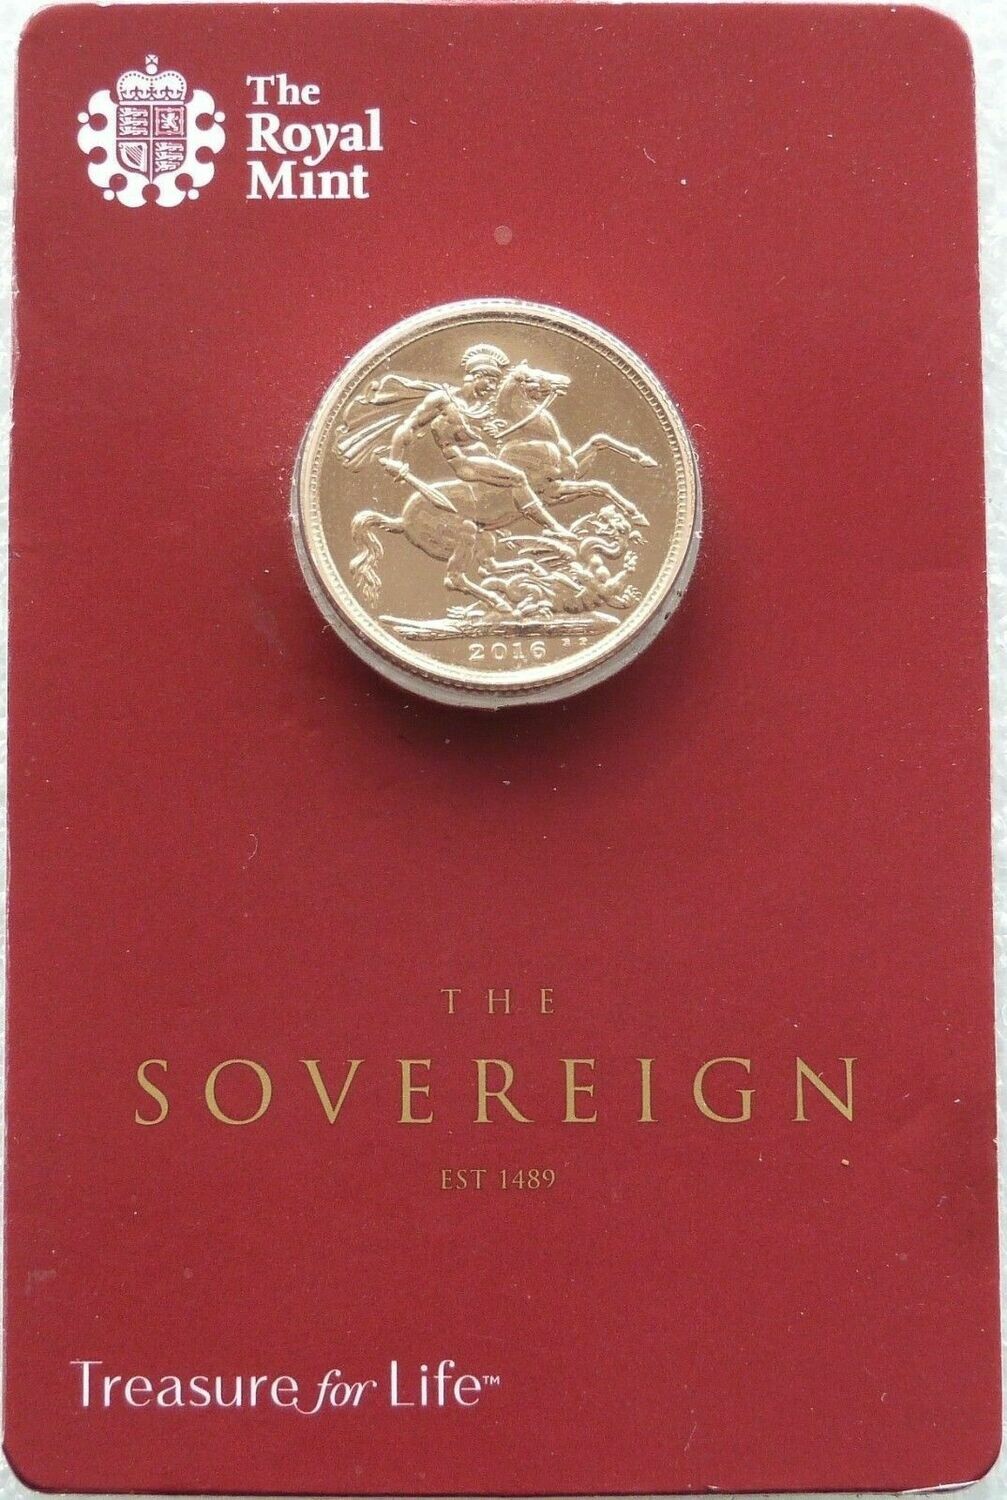 2016 St George and the Dragon Full Sovereign Gold Coin Mint Card